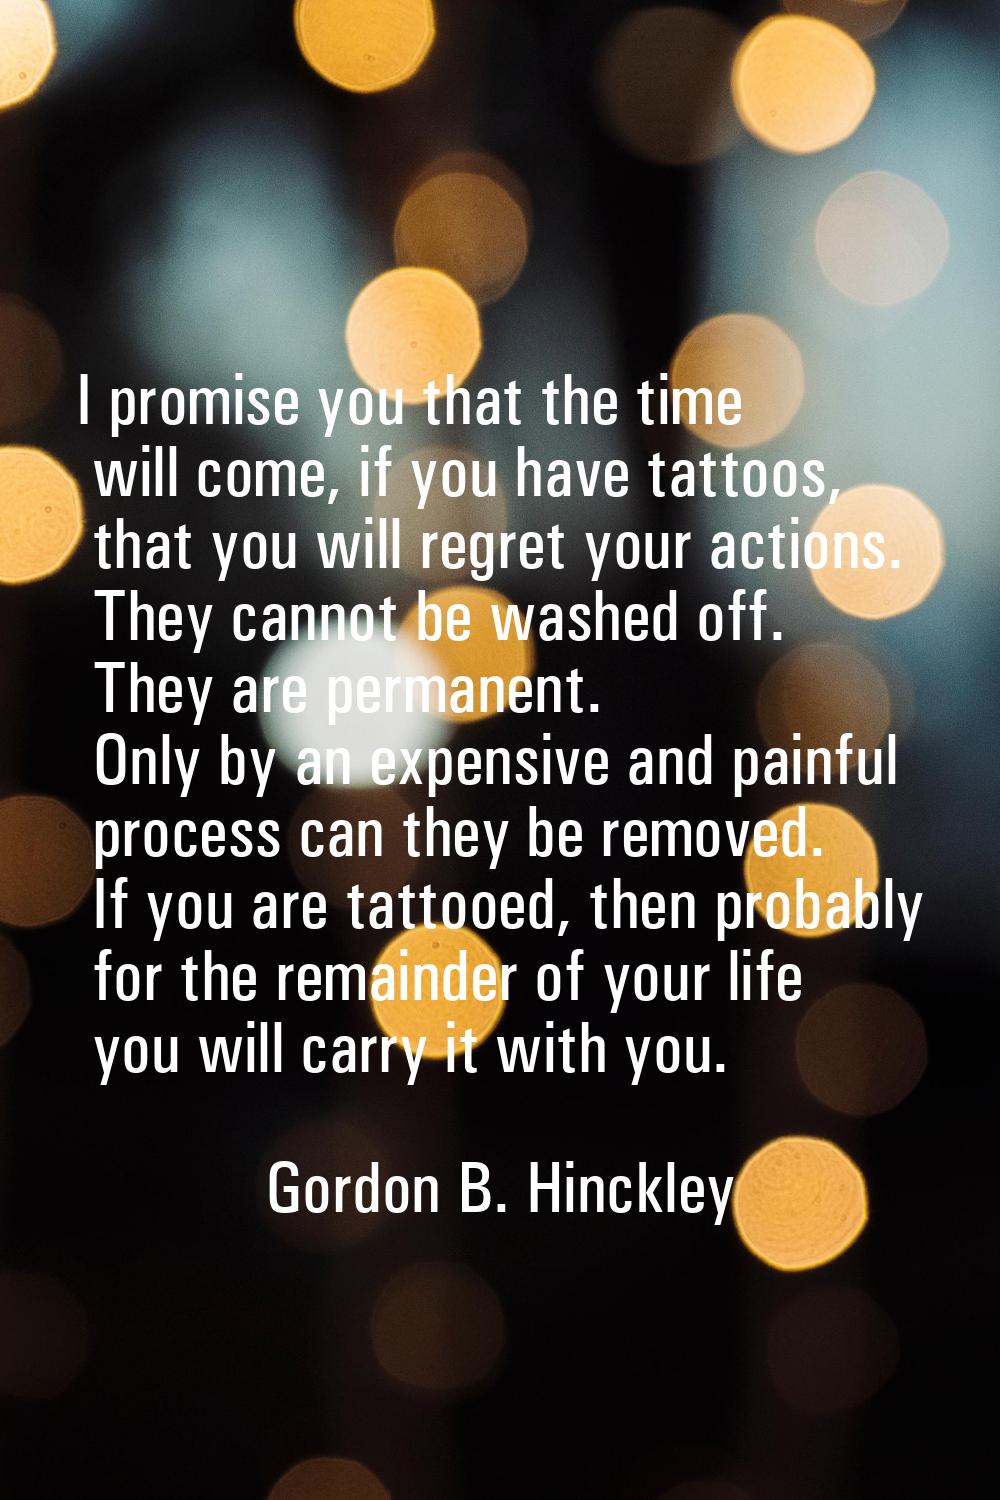 I promise you that the time will come, if you have tattoos, that you will regret your actions. They